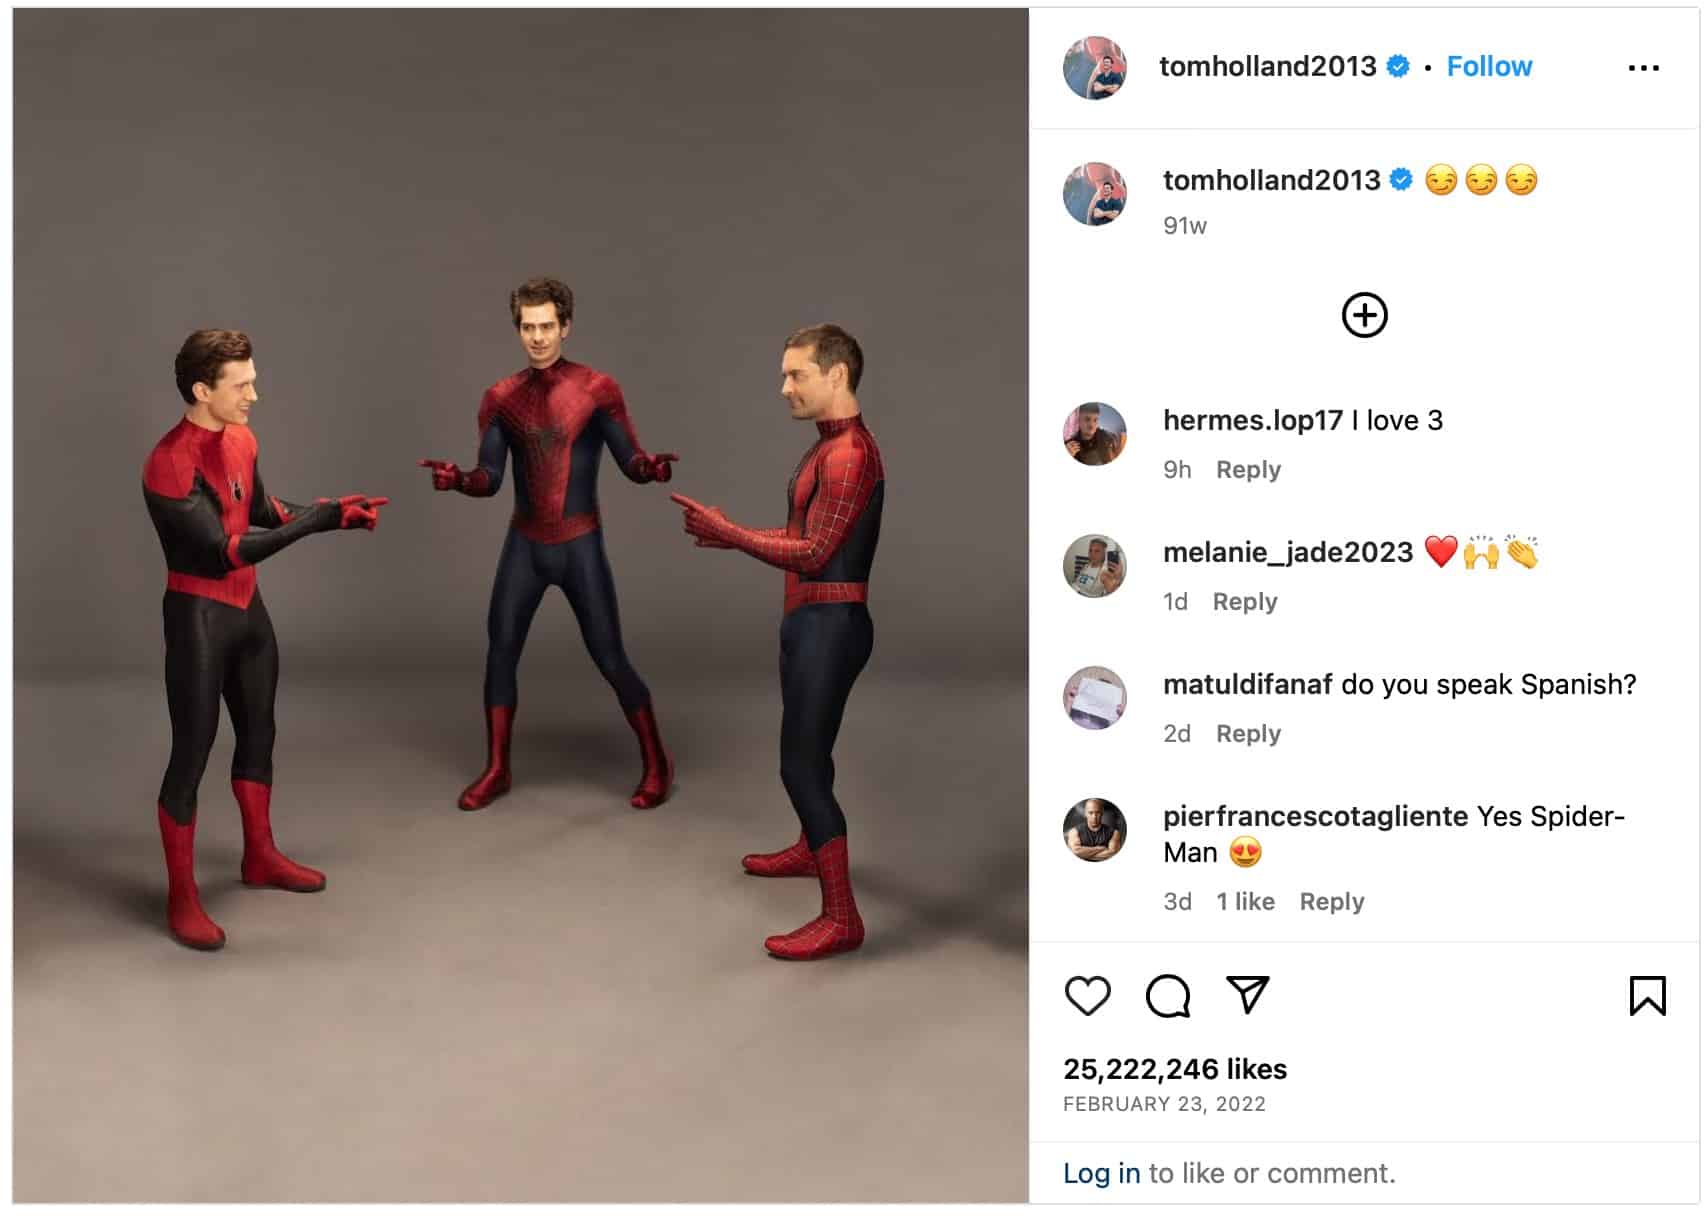 Tom Holland, Andrew Garfield, and Tobey Maguire recreate a classic meme.